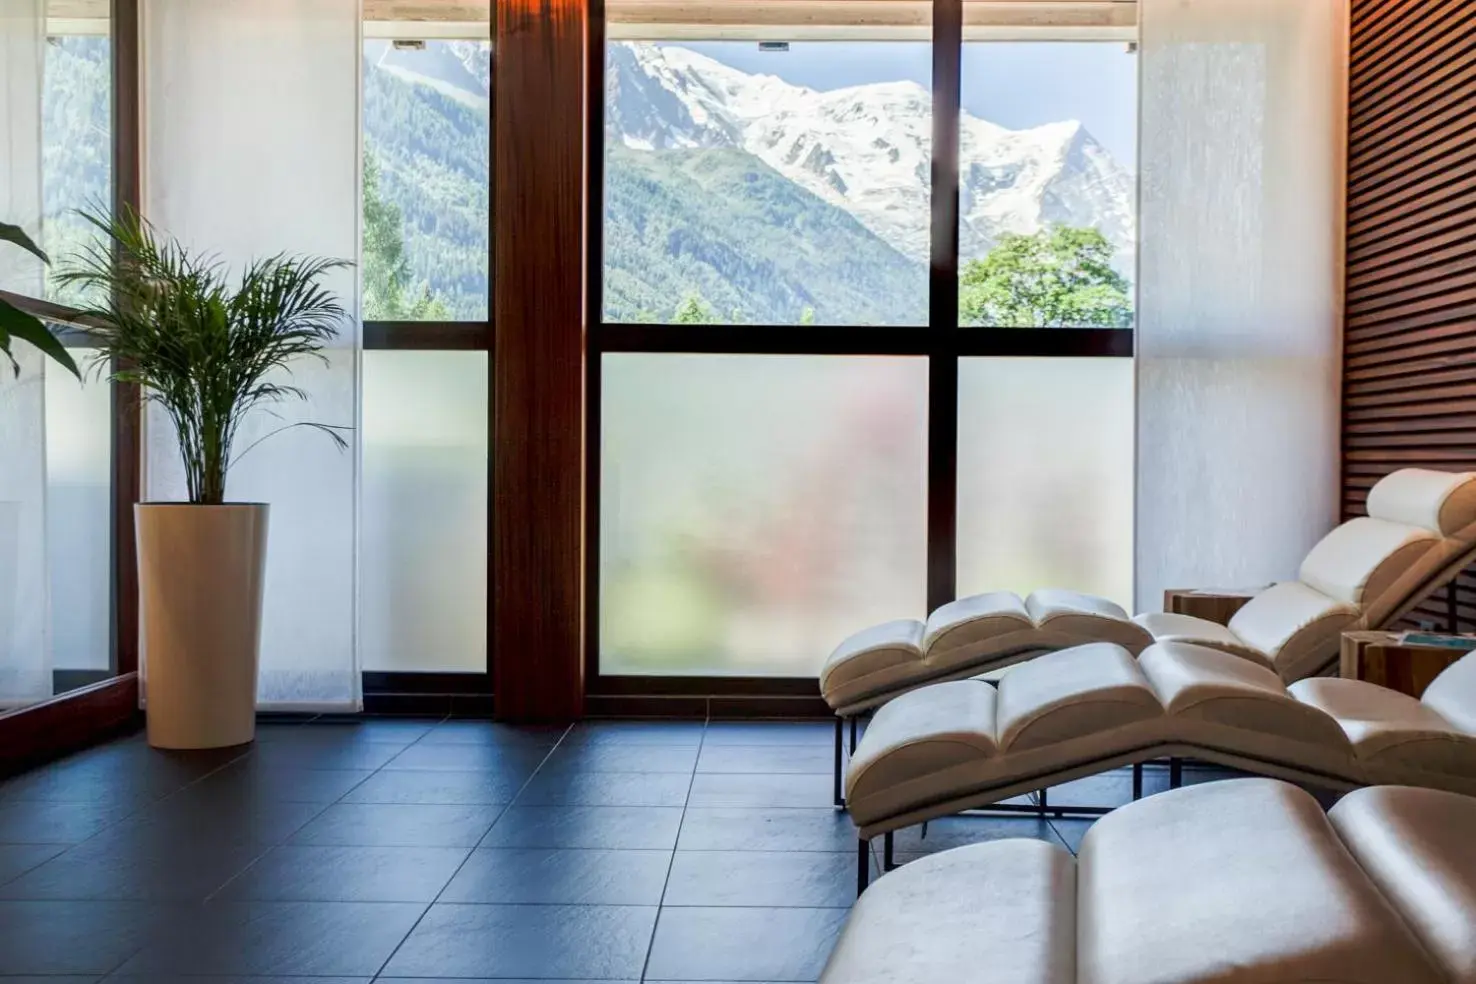 Area and facilities in Excelsior Chamonix Hôtel & Spa